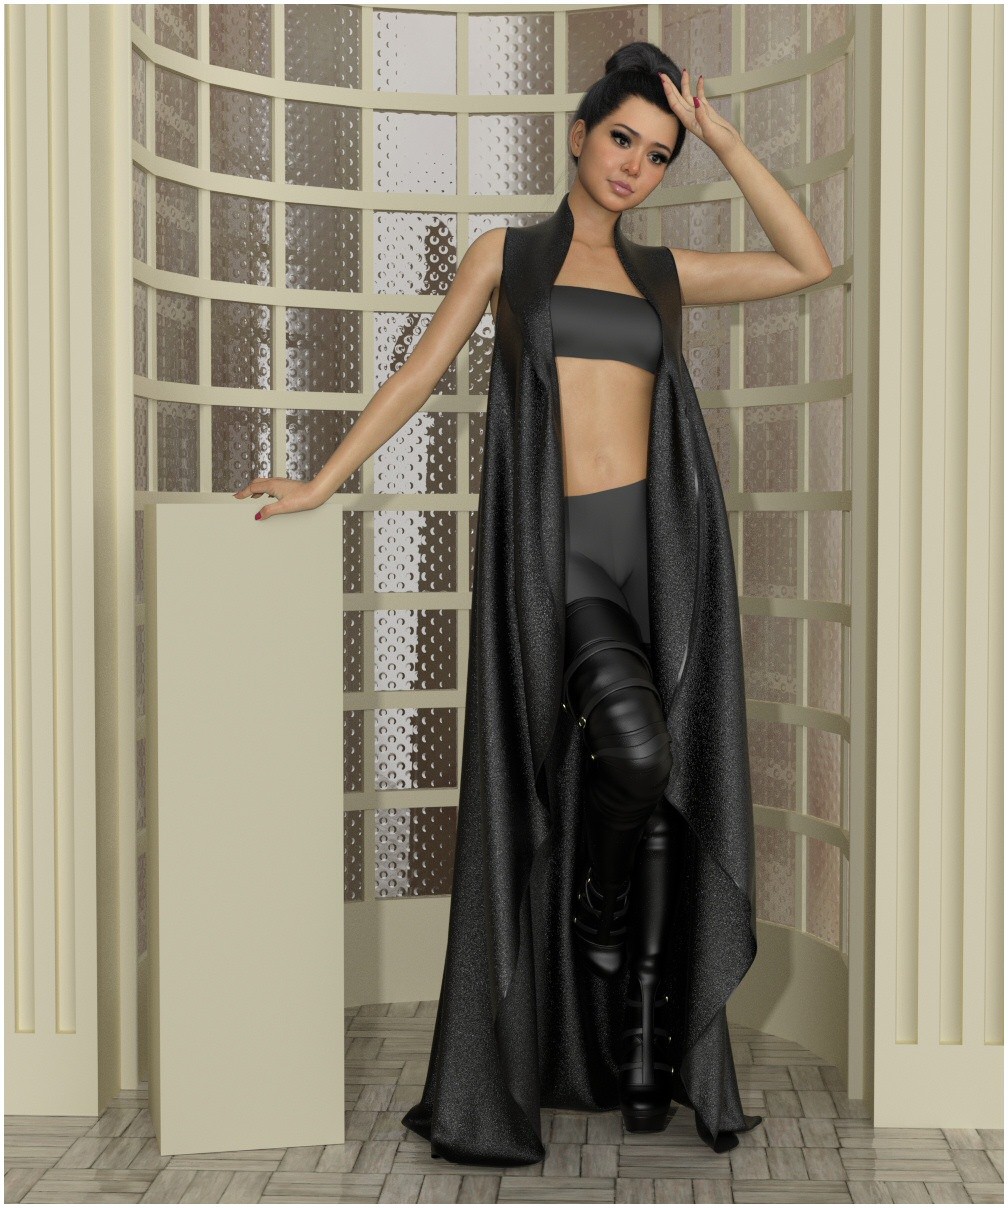 dForce - Contessa Robe for G8Fs by: Lully, 3D Models by Daz 3D